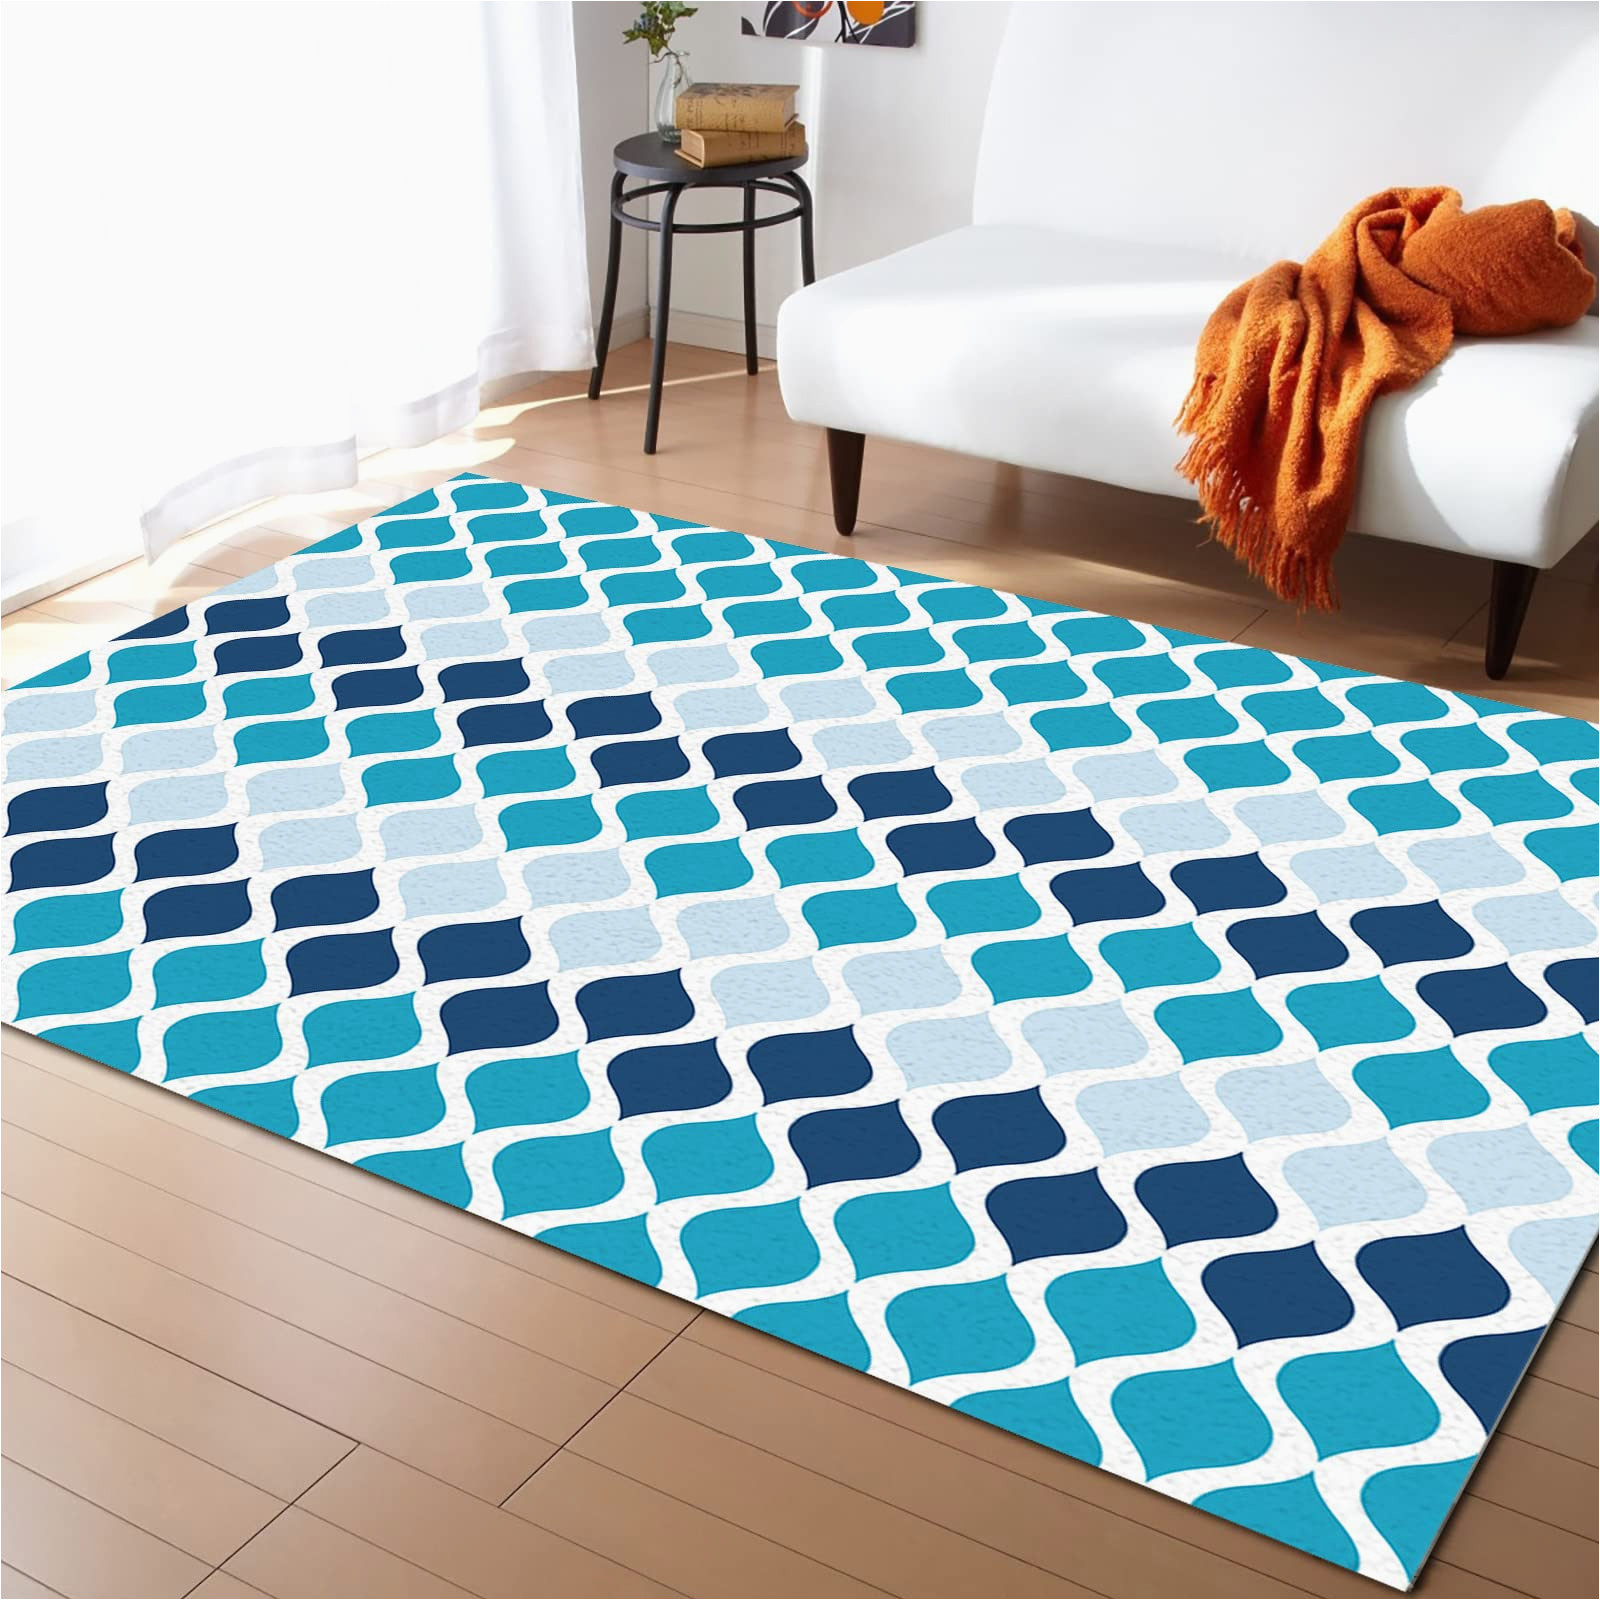 Navy Blue and Turquoise Rug Amazon.com: Abstract Geometry area Rug 5’x8′,turquoise Navy Blue …